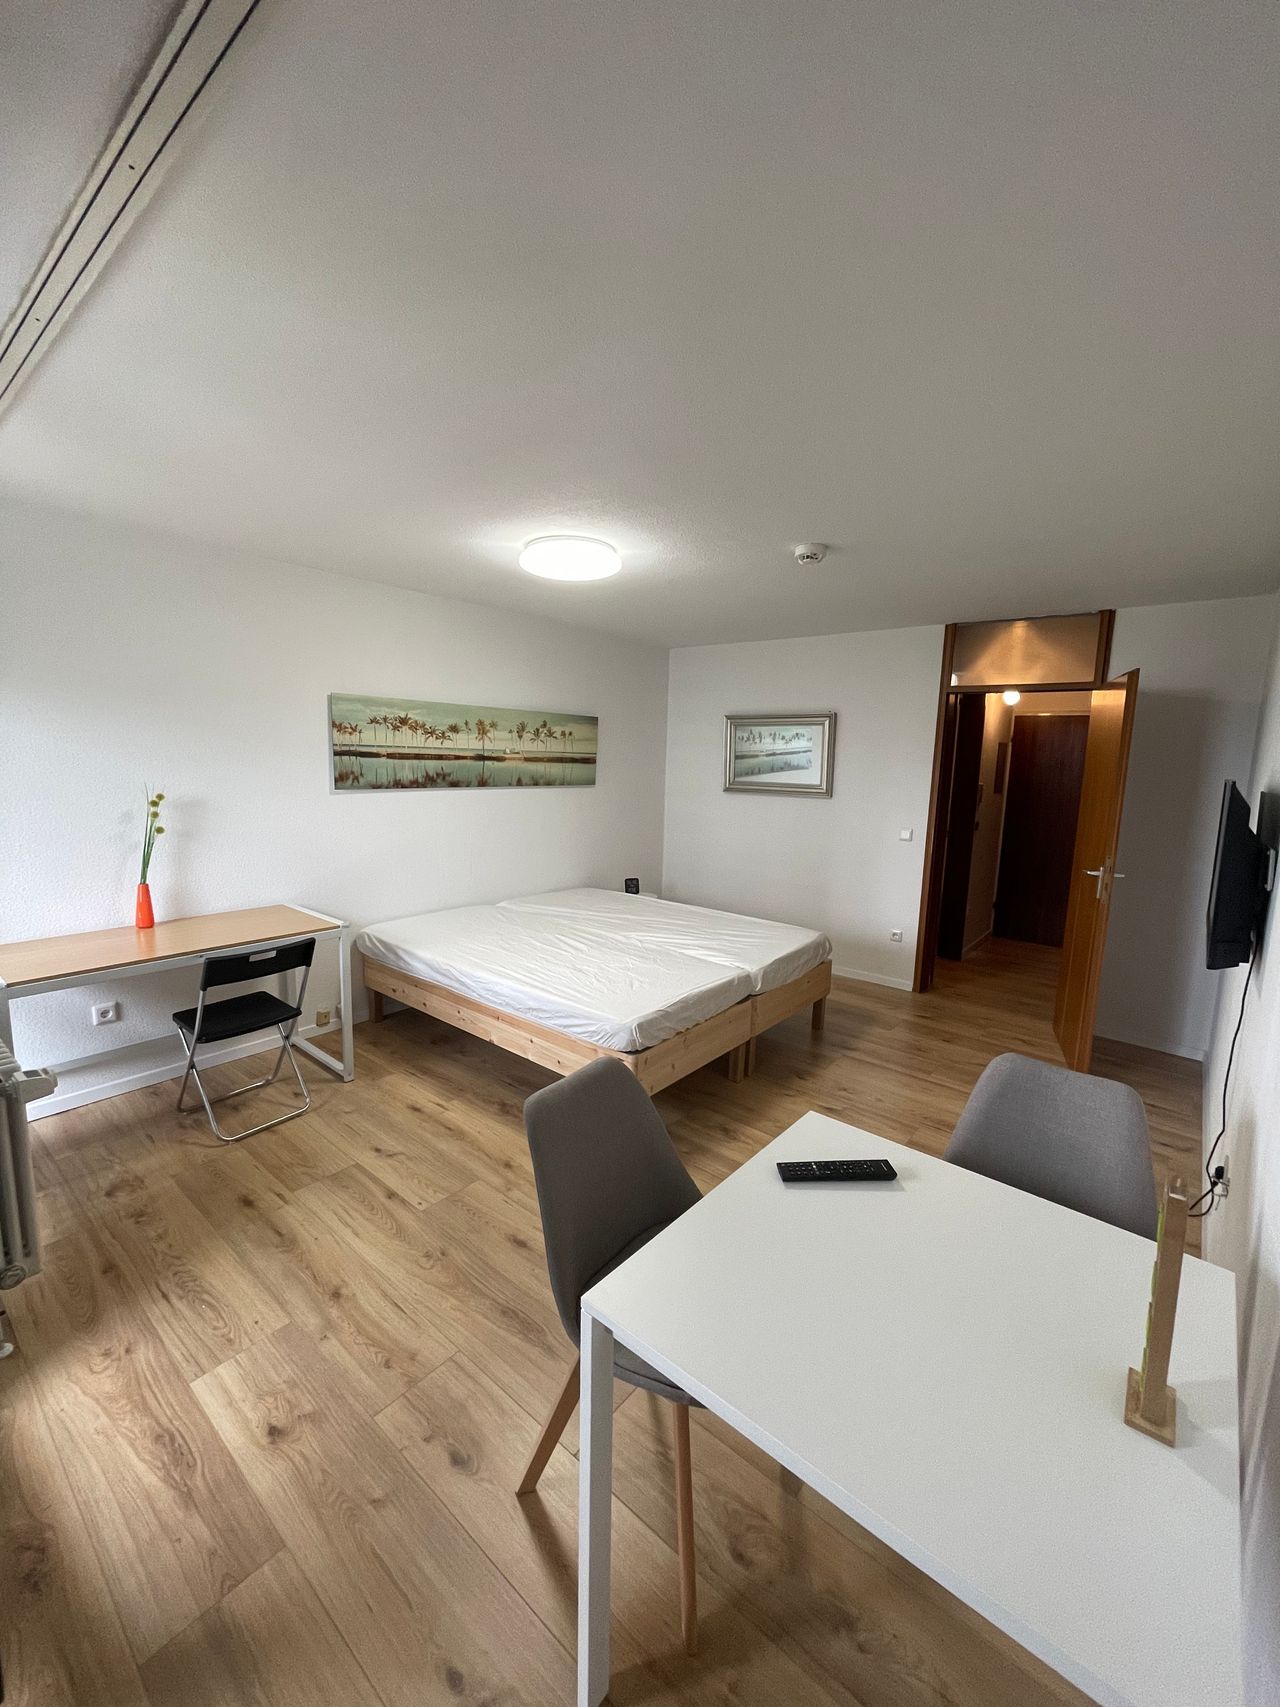 Studio appartment in Nürnberg with good Remote work posibility